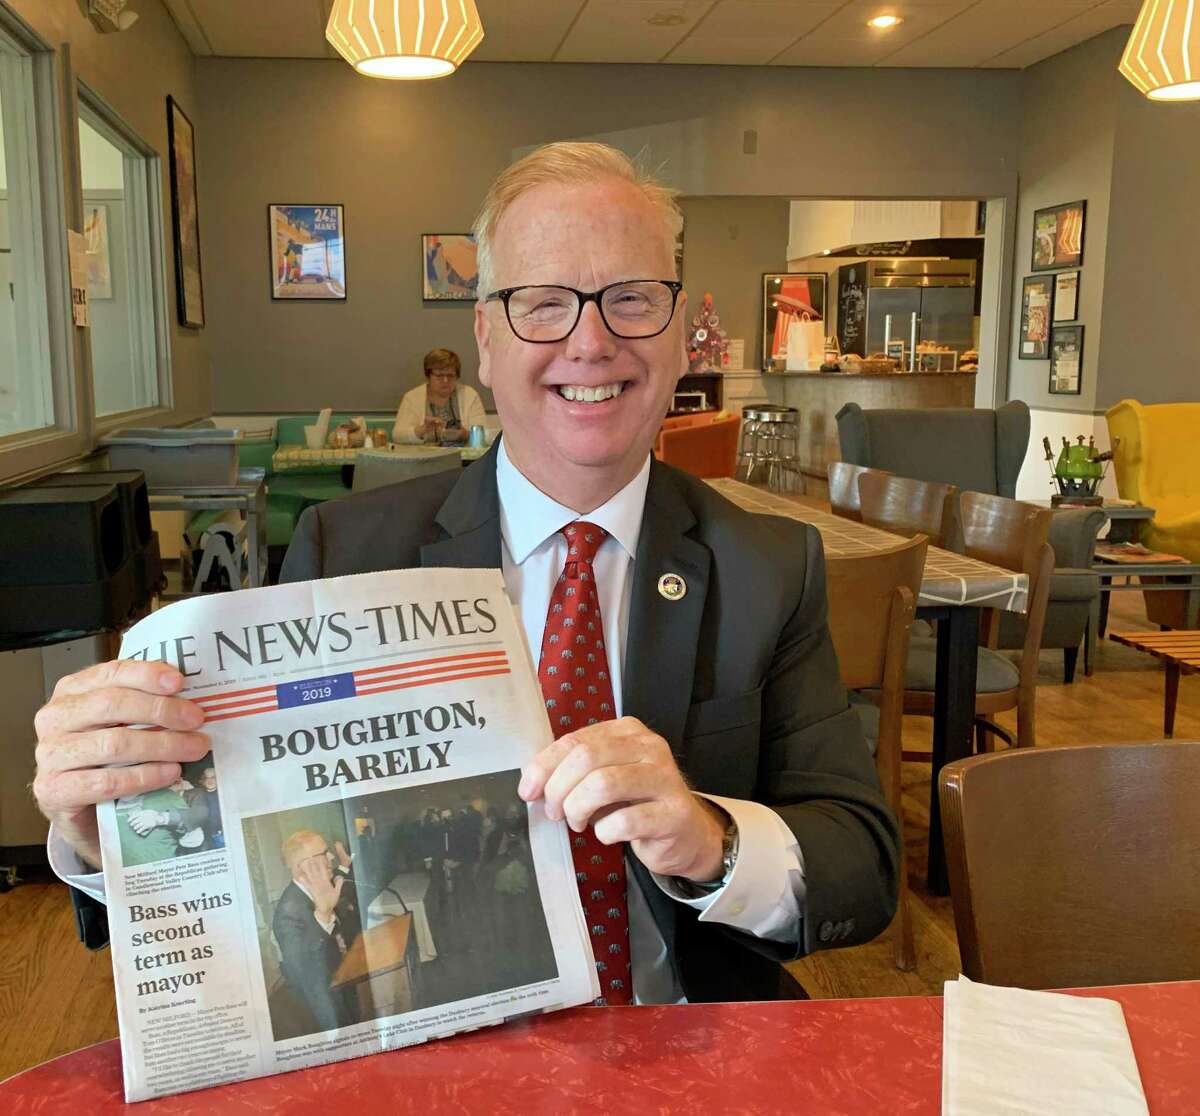 Mayor Mark Boughton shows the local newspaper the day after winning an unprecedented 10th term.